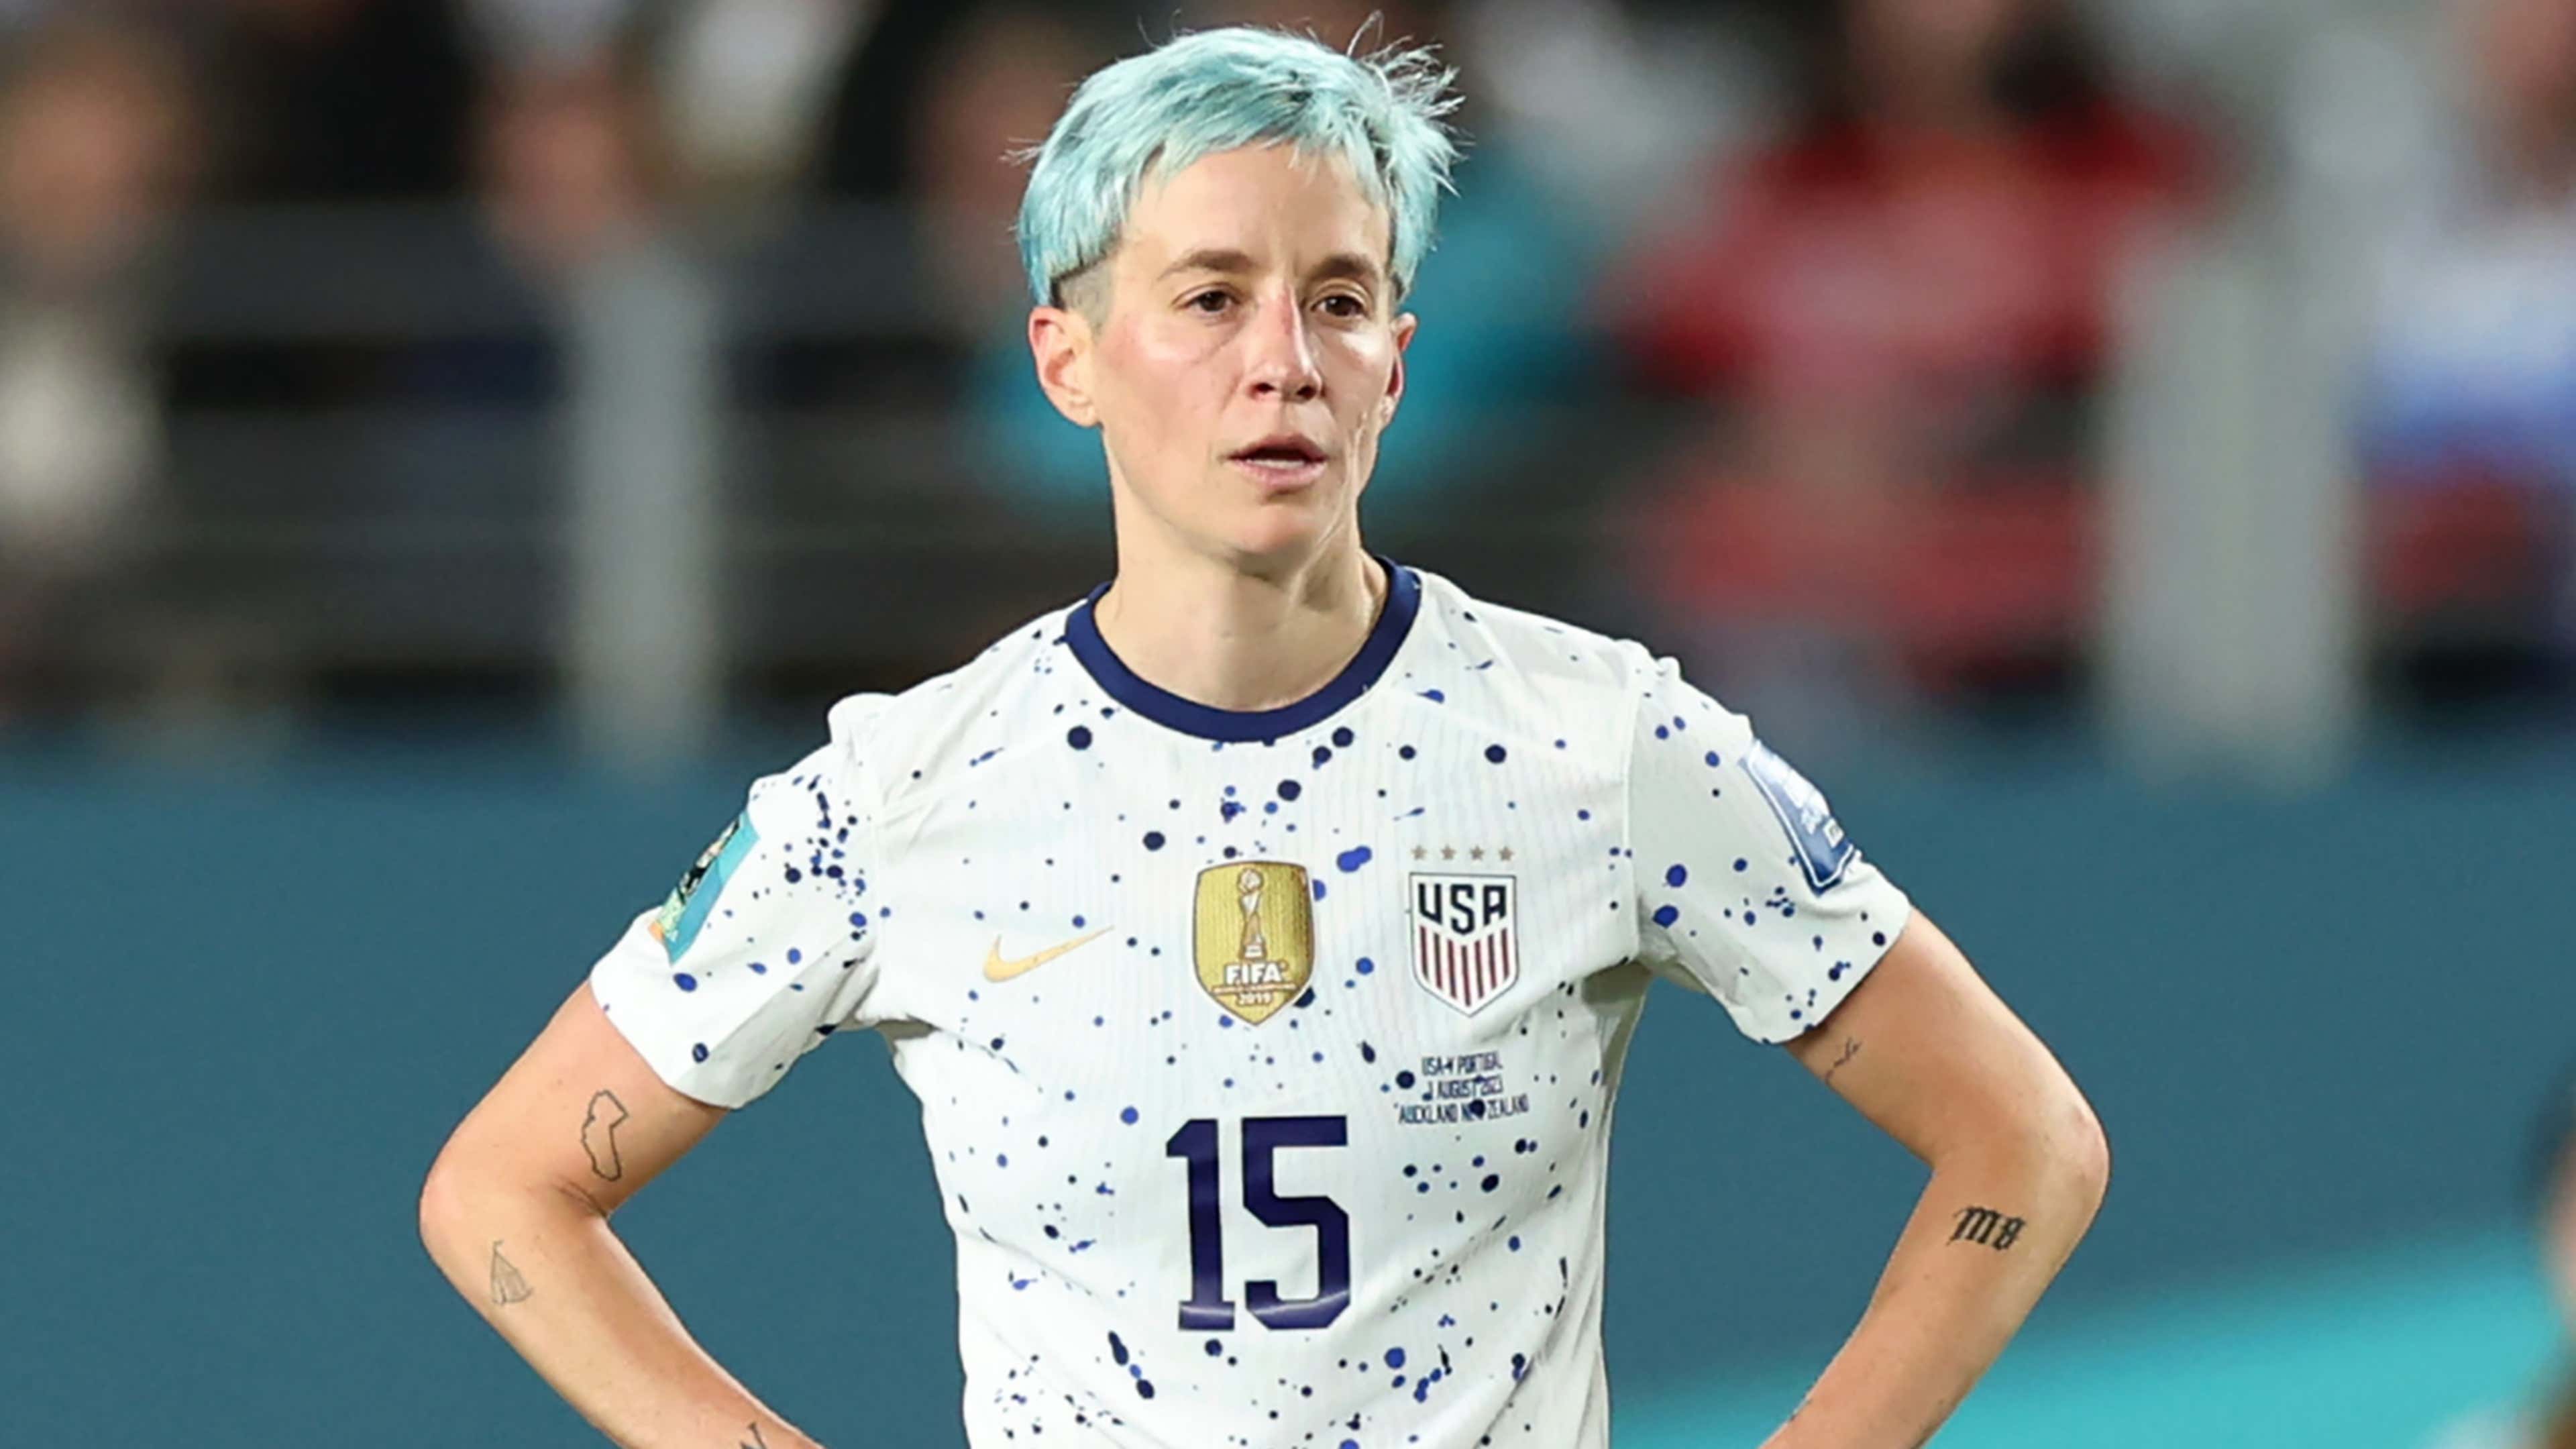 Netflix sets premiere date for USWNT World Cup docuseries